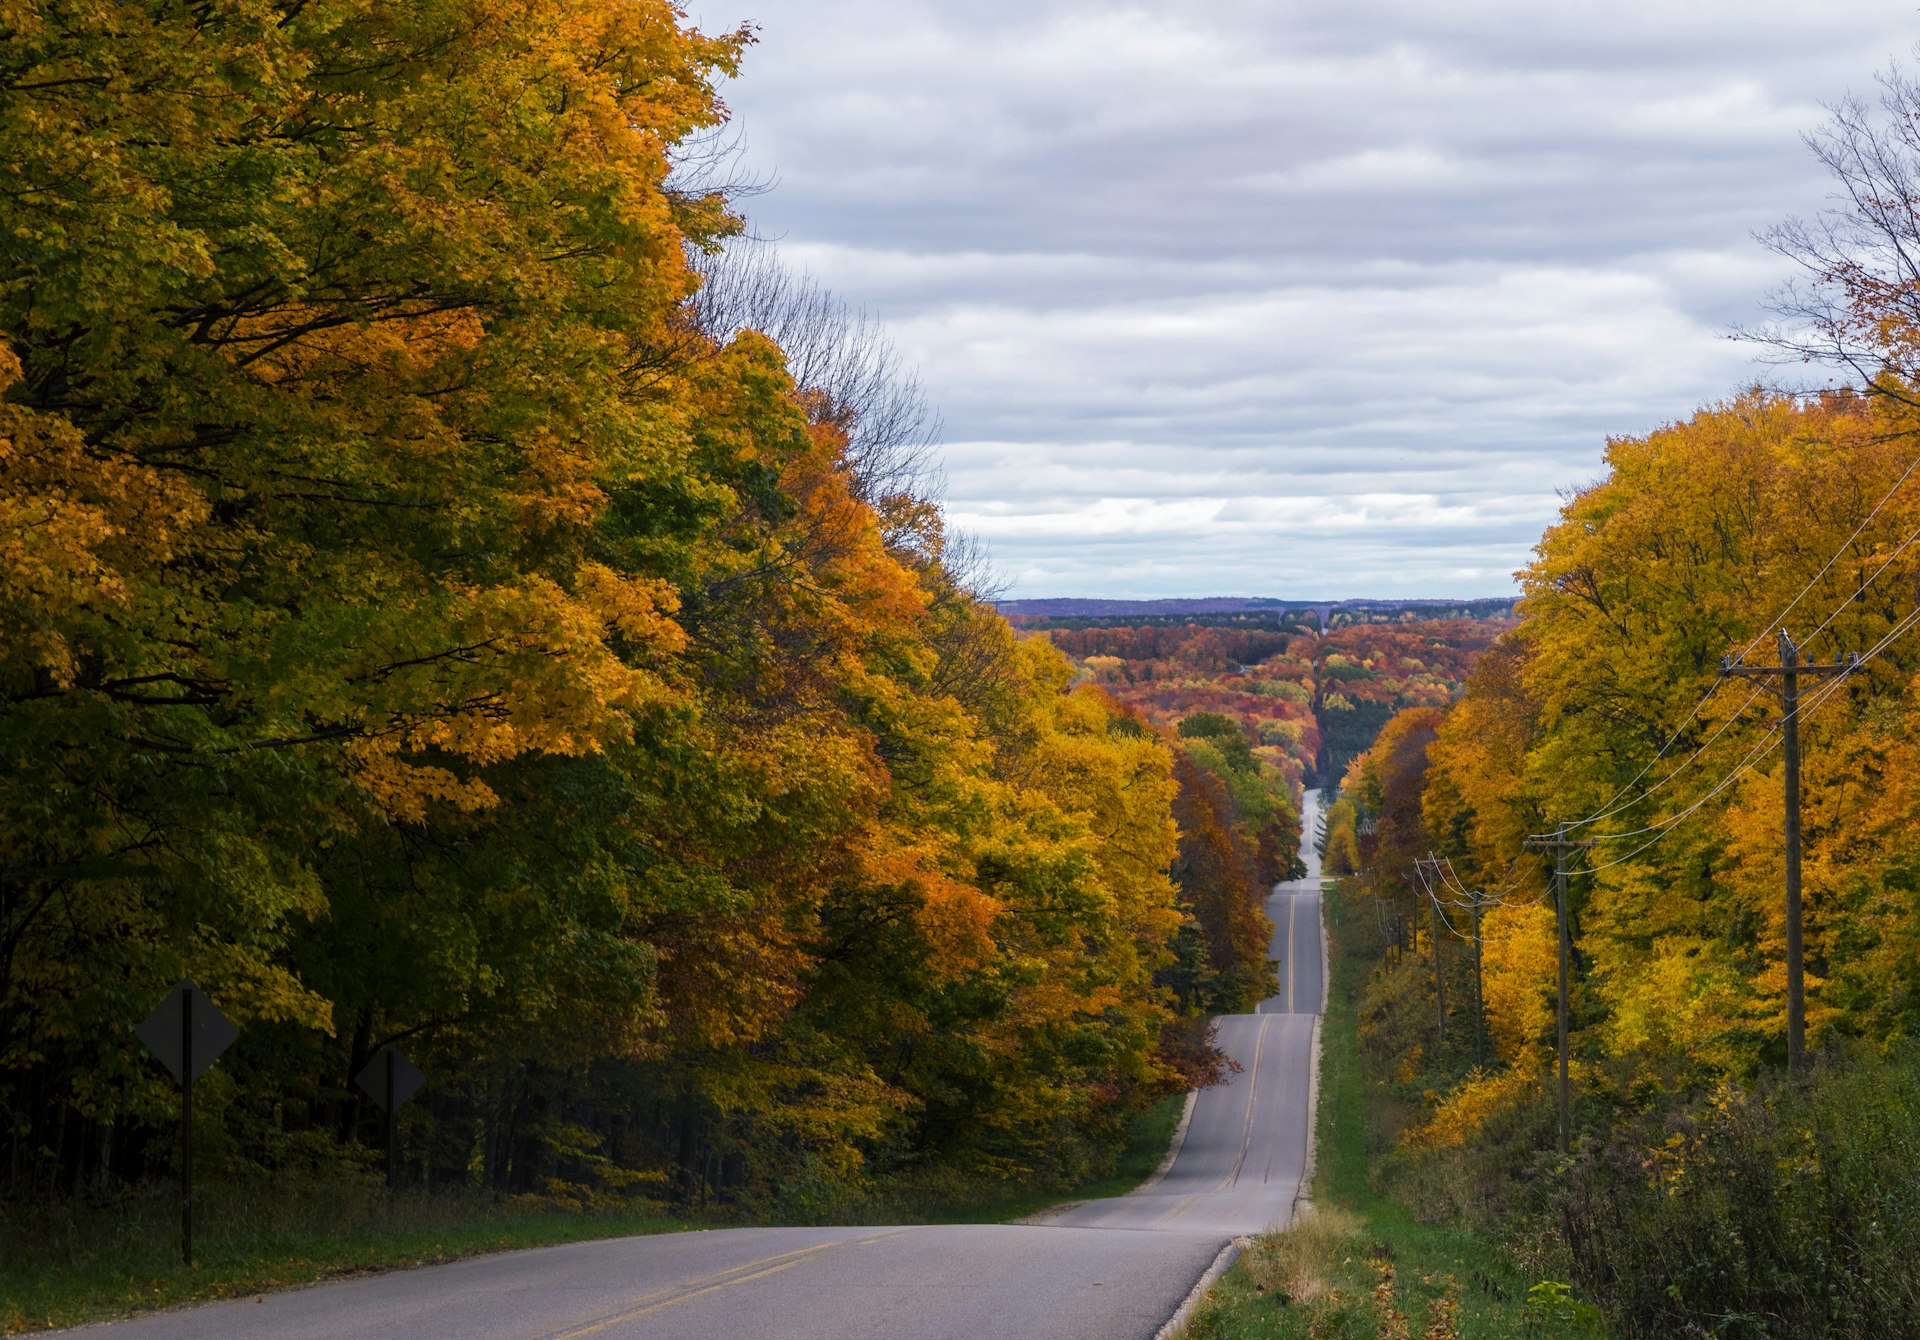 Tree-lined road in fall colors of gold, red and orange along the Tunnel of Trees in Michigan